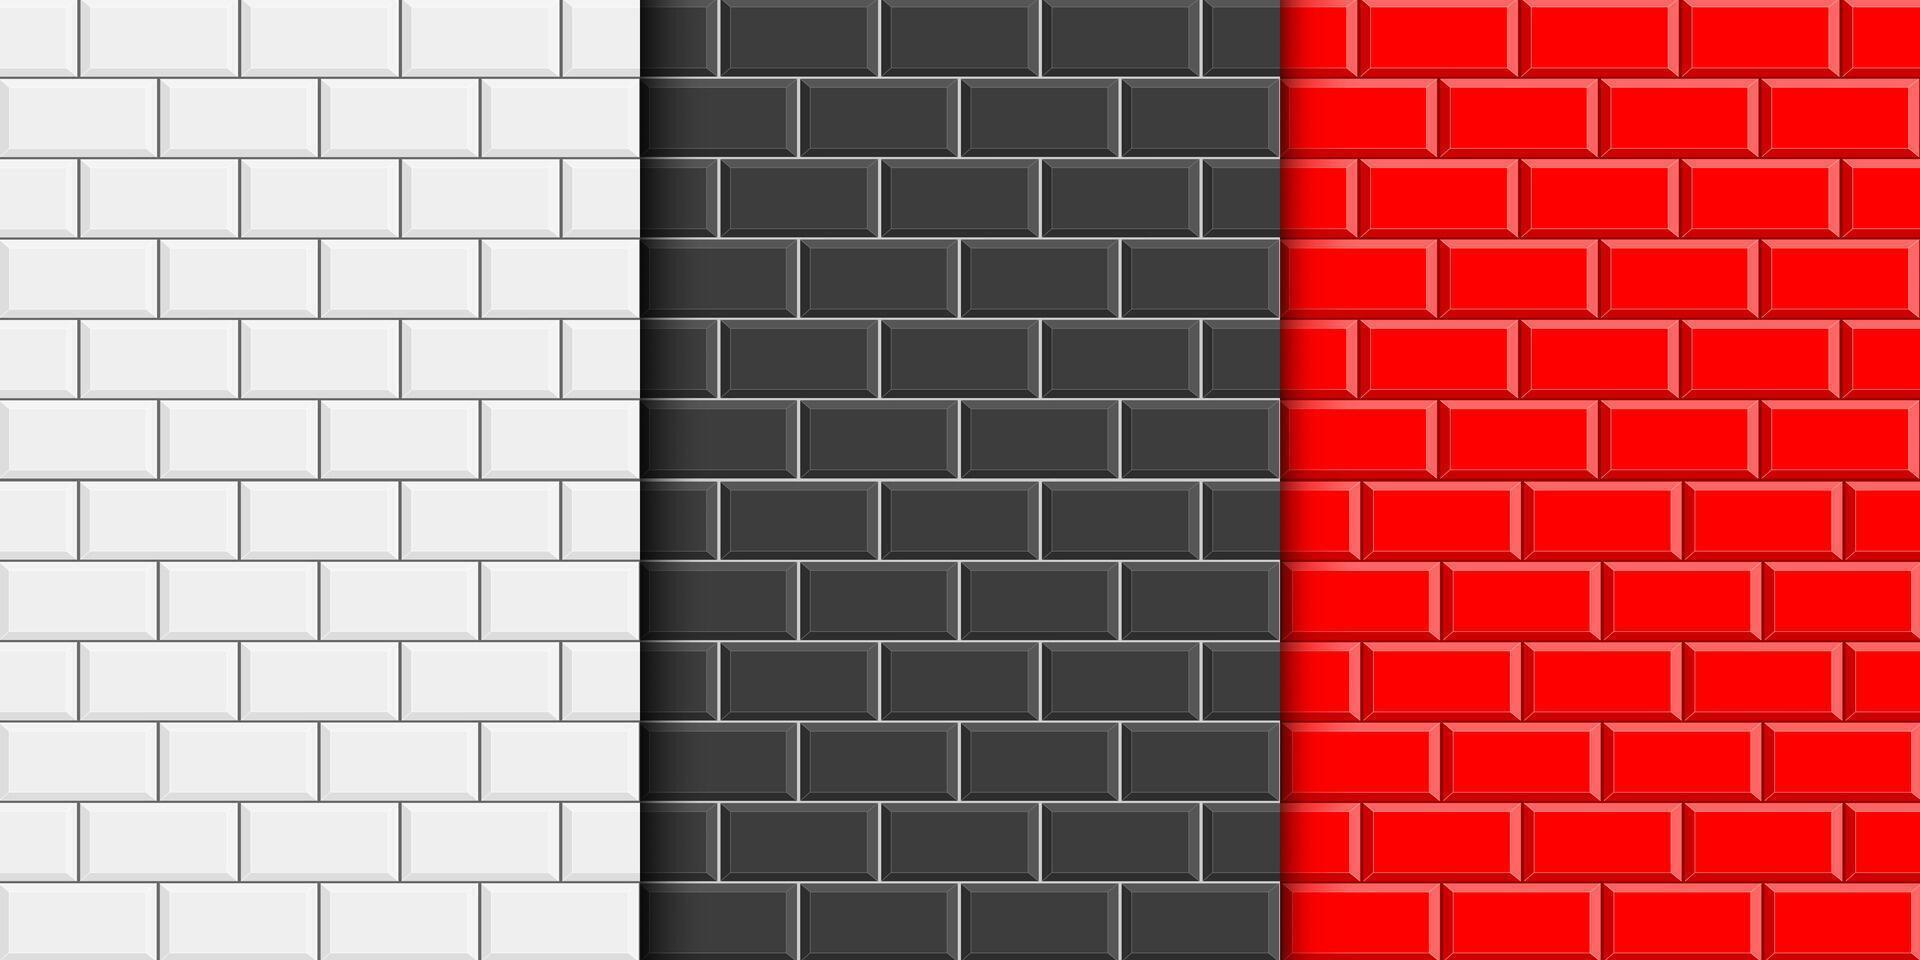 Set of white, black and red subway wall textures. Ceramic tile or stone brick background. Kitchen backsplash or bathroom floor texture. Interior or exterior surface design vector